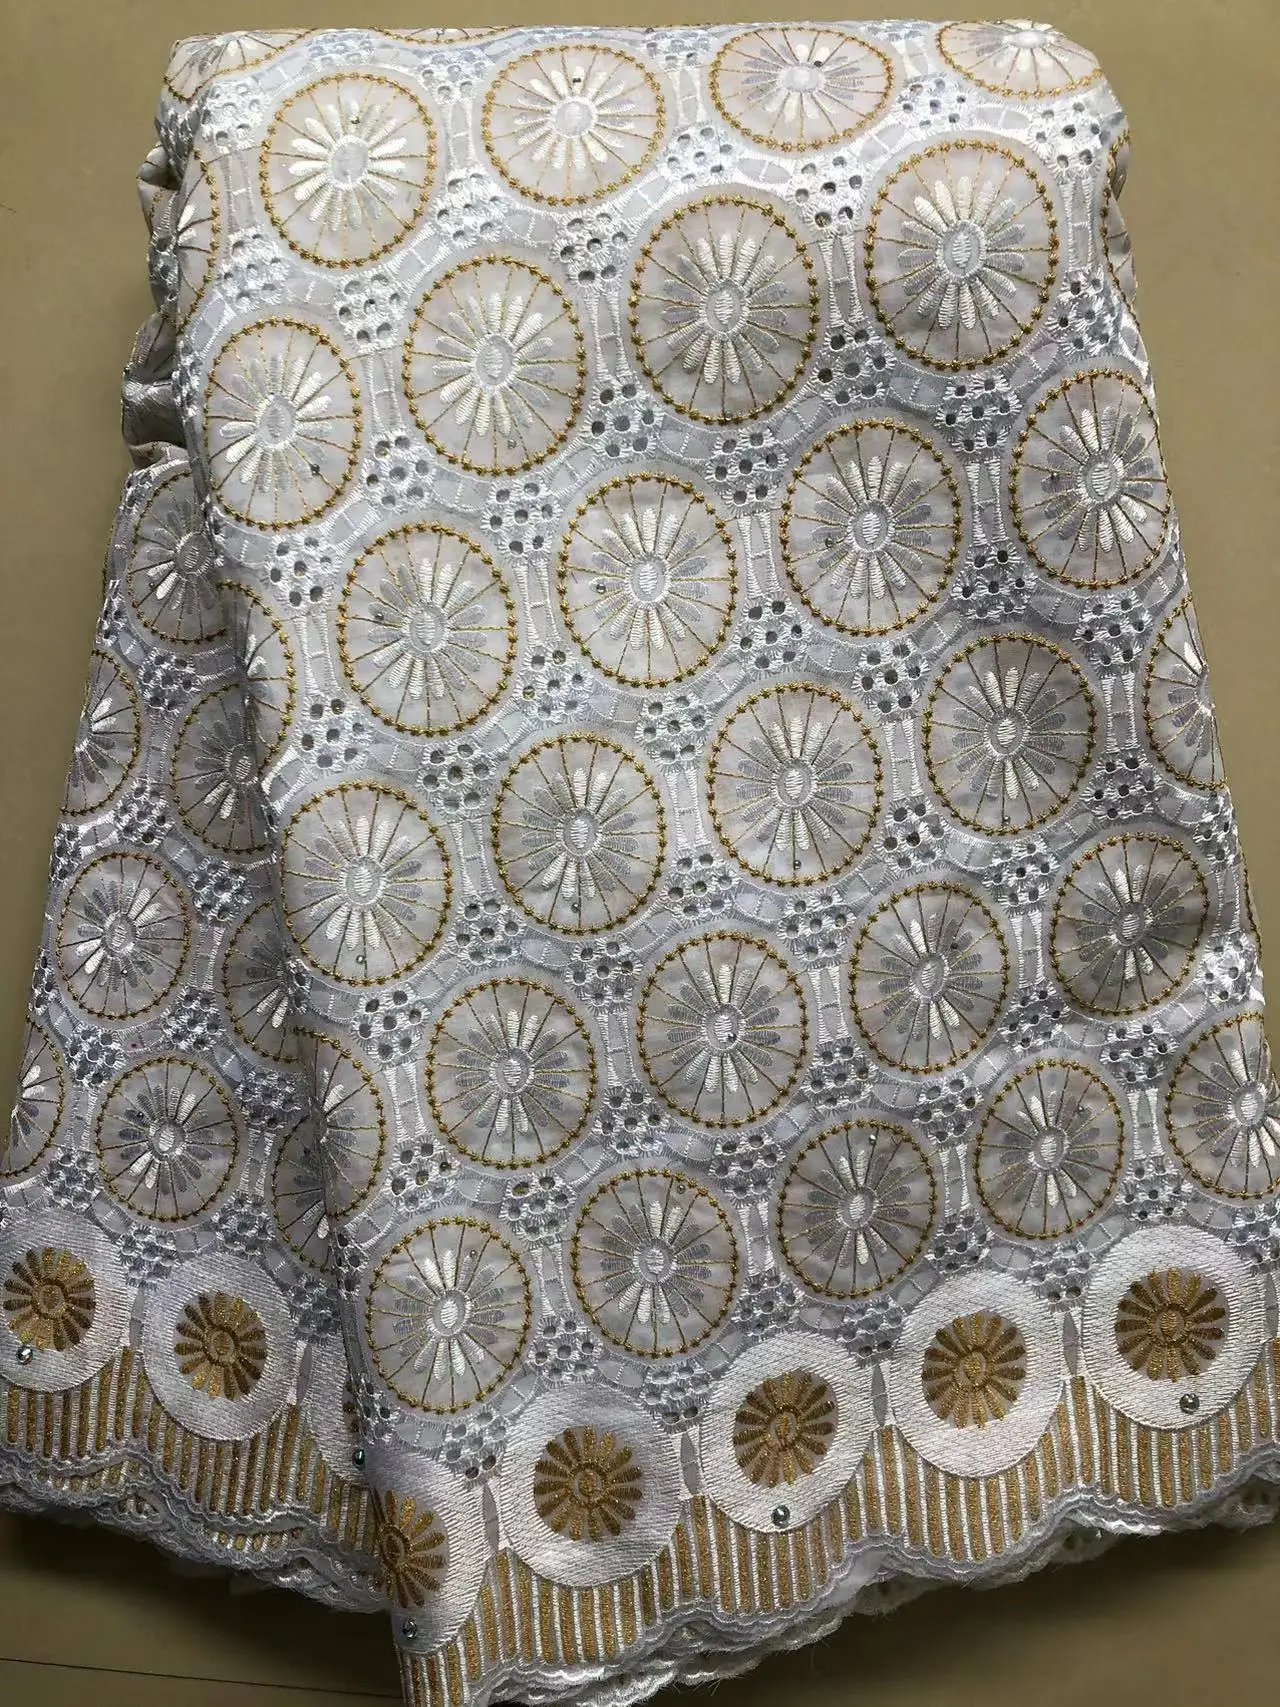 African Cotton Lace Fabric 2023 High Quality Swiss Voile Lace In Switzerland With Stones Nigerian Lace Fabrics For Wedding Dress pgc swiss voile lace in switzerland 2022 nigerian embroidered dry cotton lace fabrics african lace fabric for wedding ya4890b 3